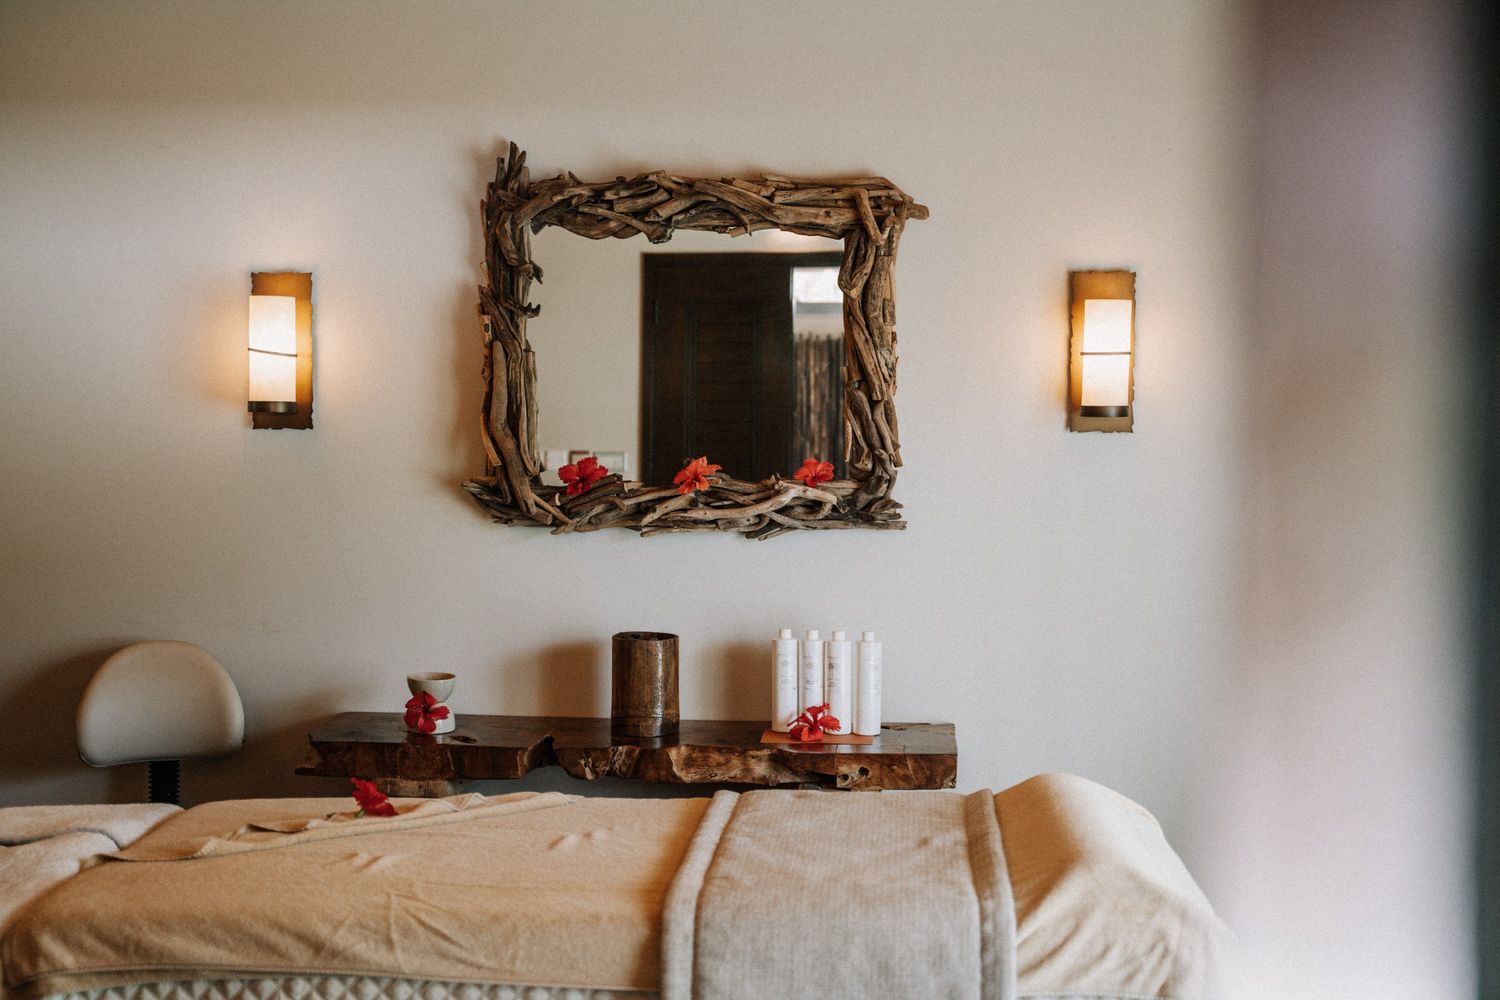 A spa treatment room with a rustic wooden mirror, wall sconces, massage table, and products on a shelf.